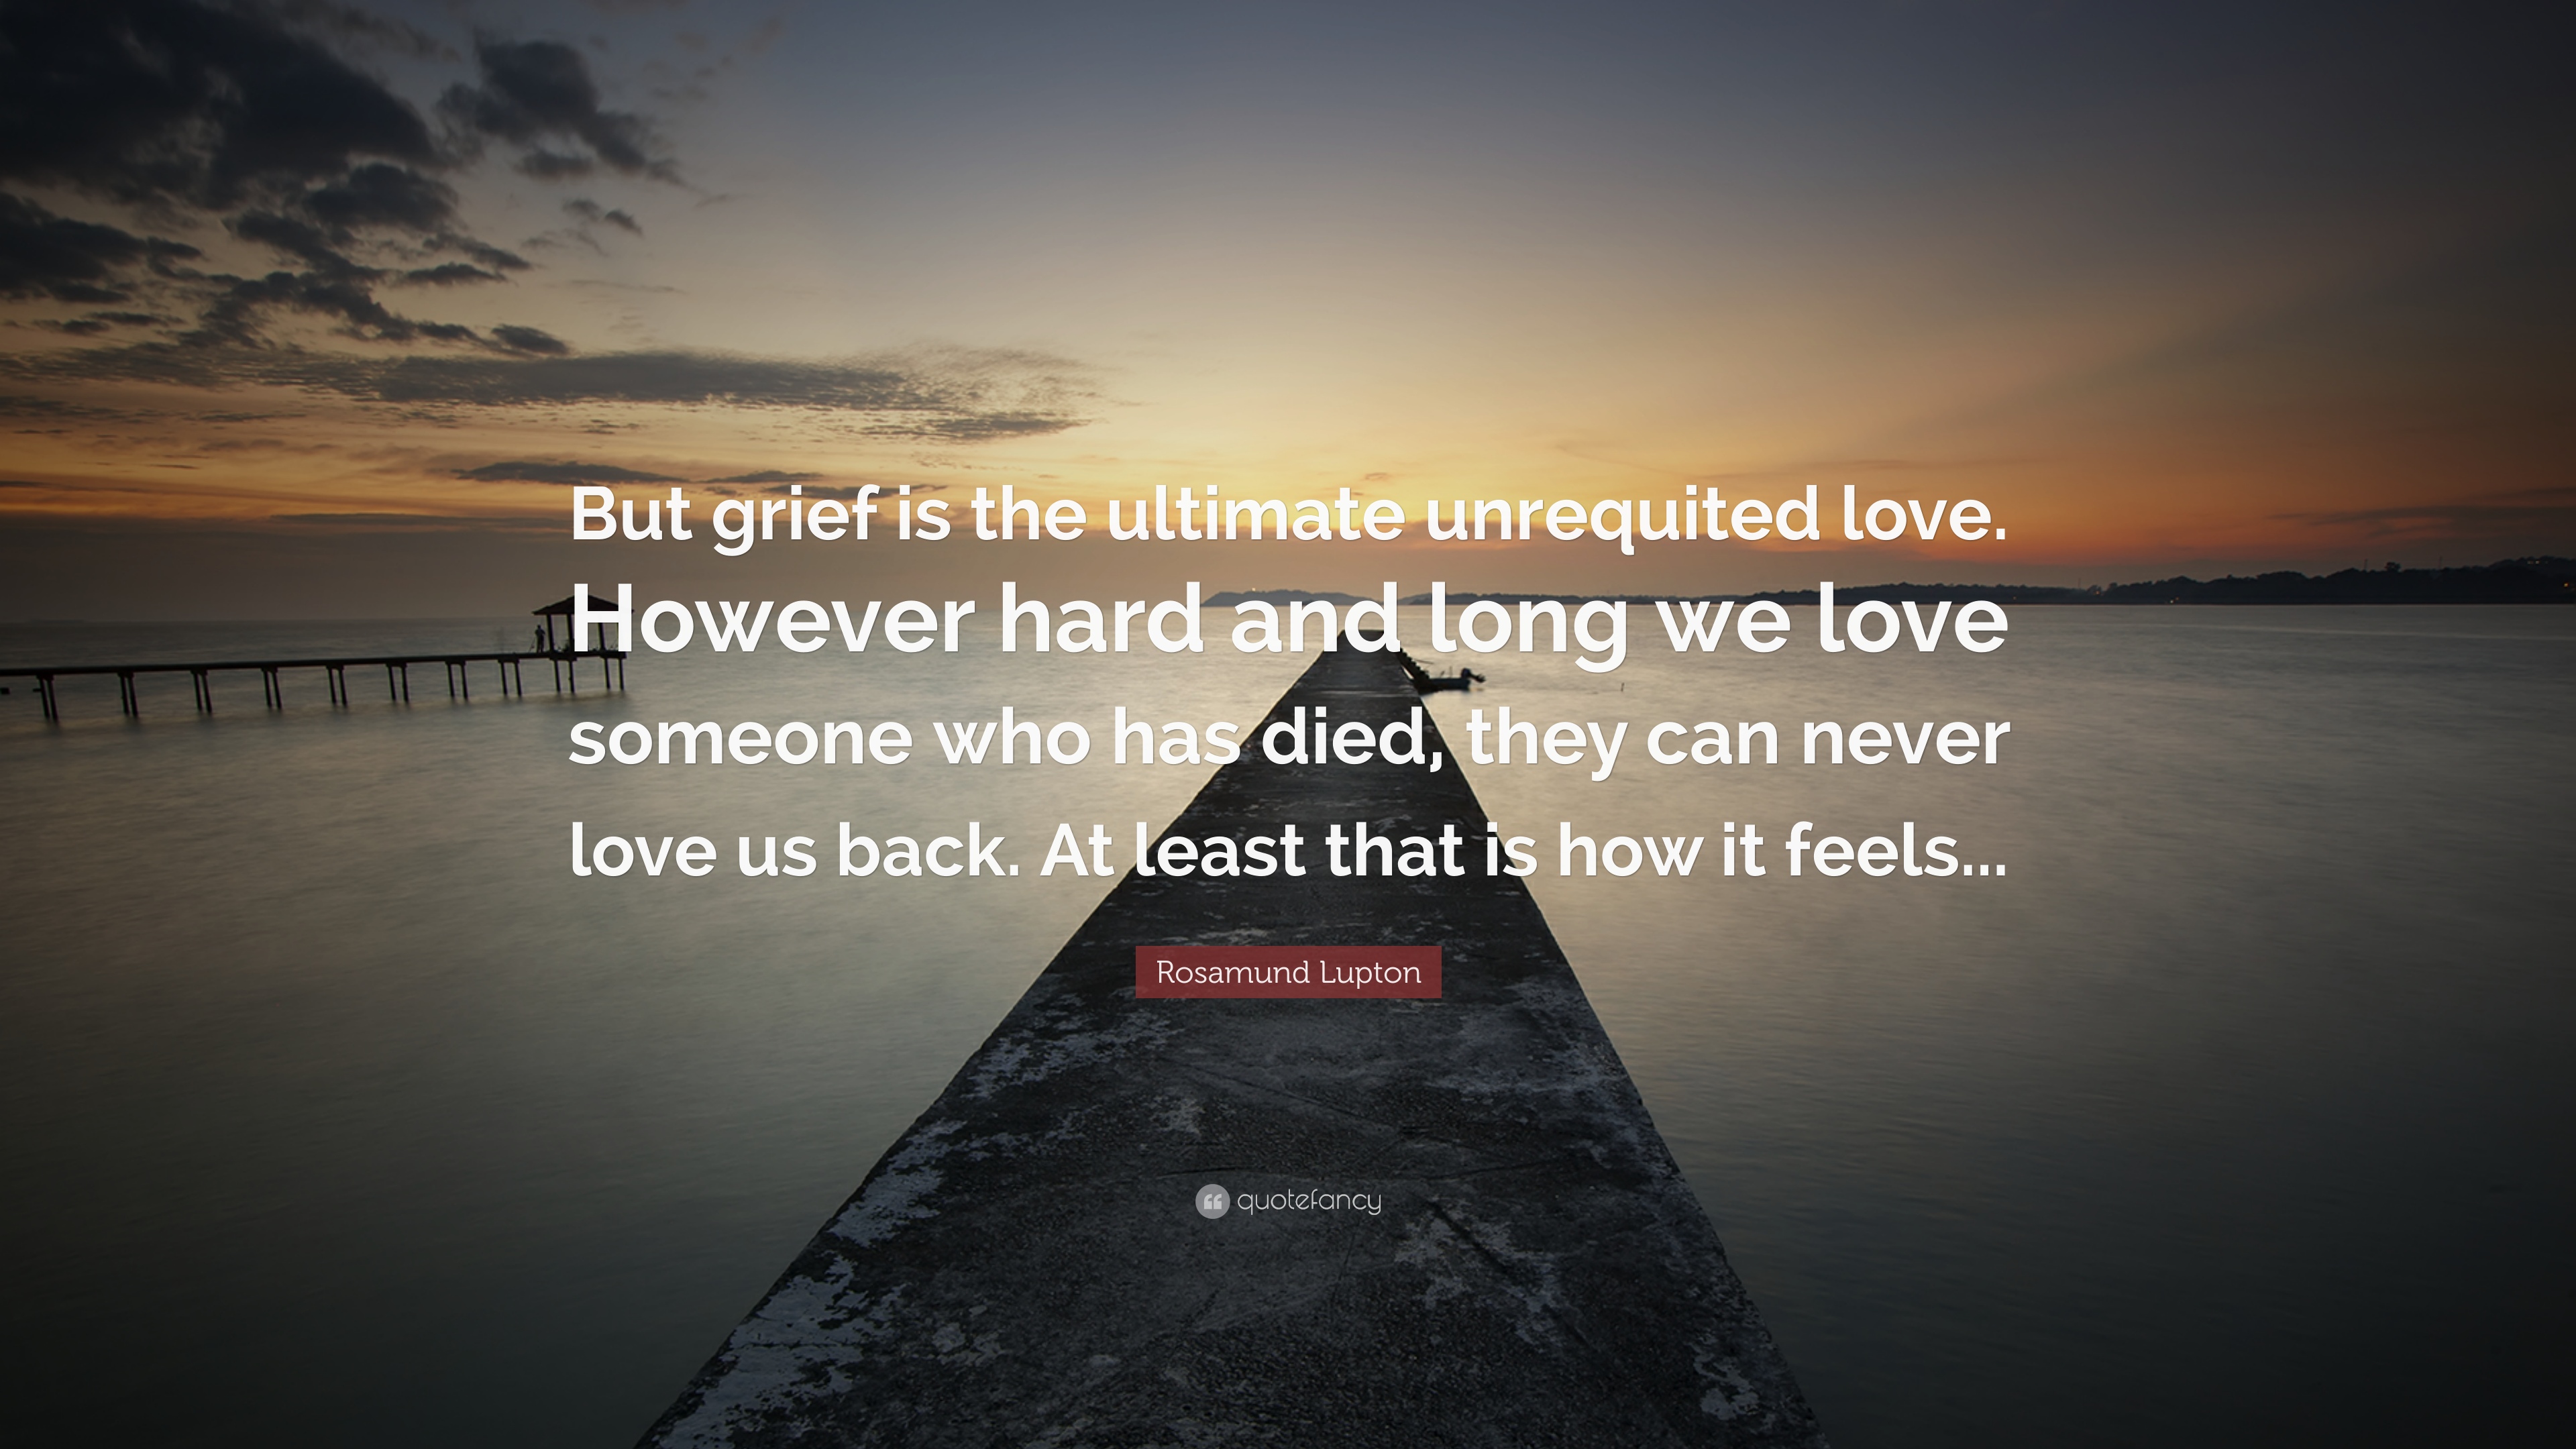 Rosamund Lupton Quote: “But grief is the ultimate unrequited